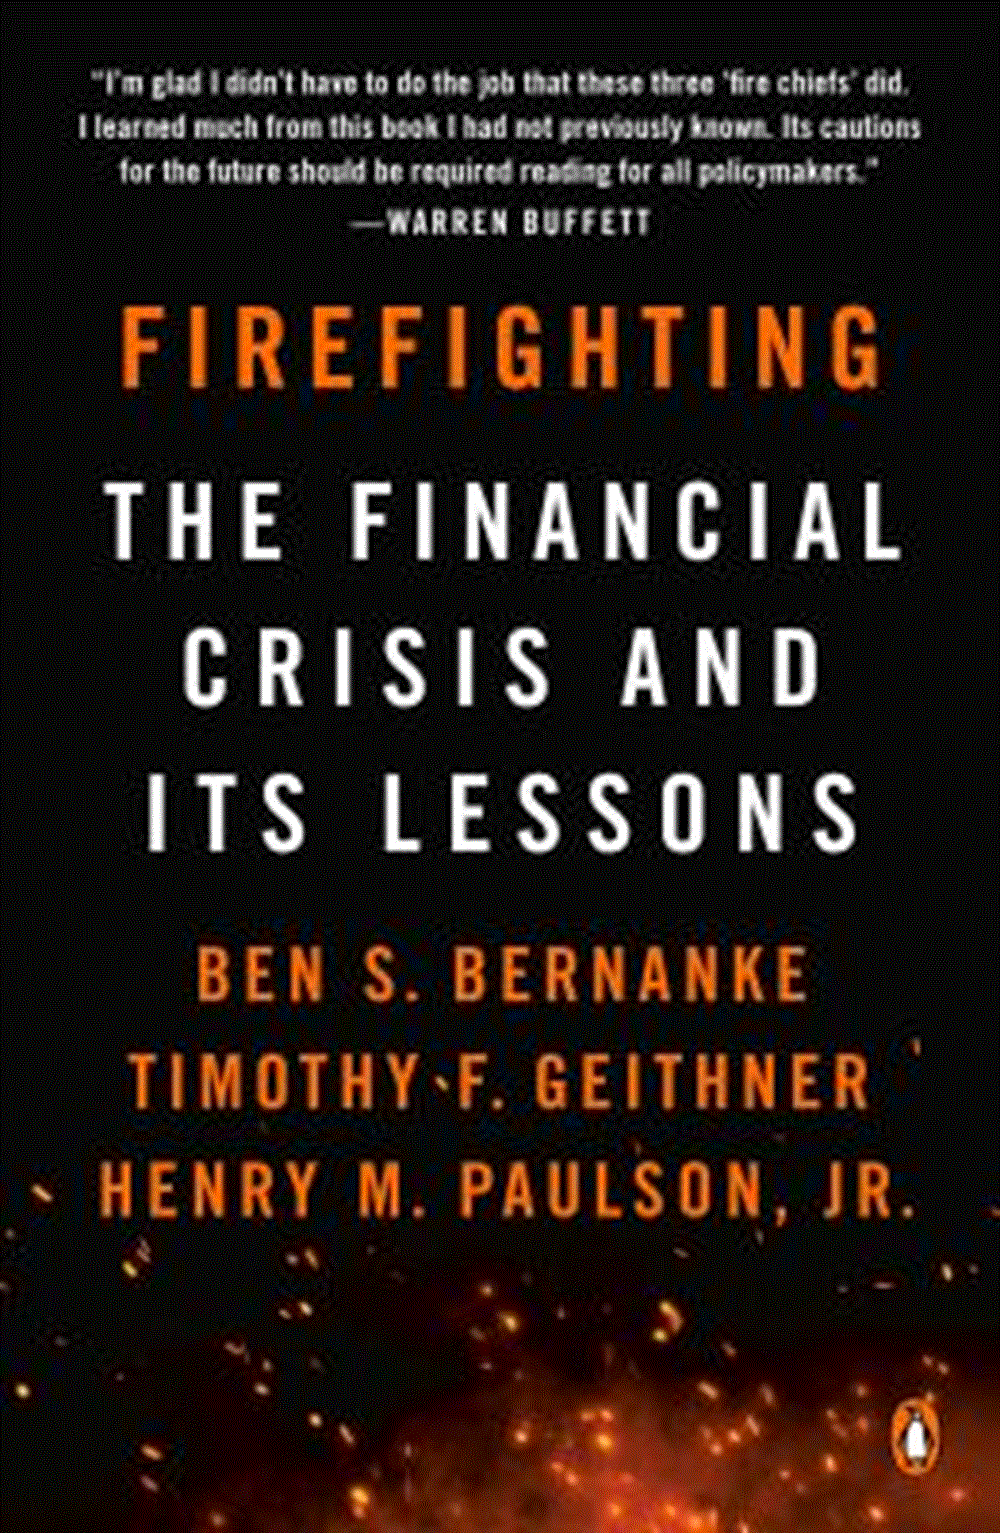 Firefighting The Financial Crisis and Its Lessons